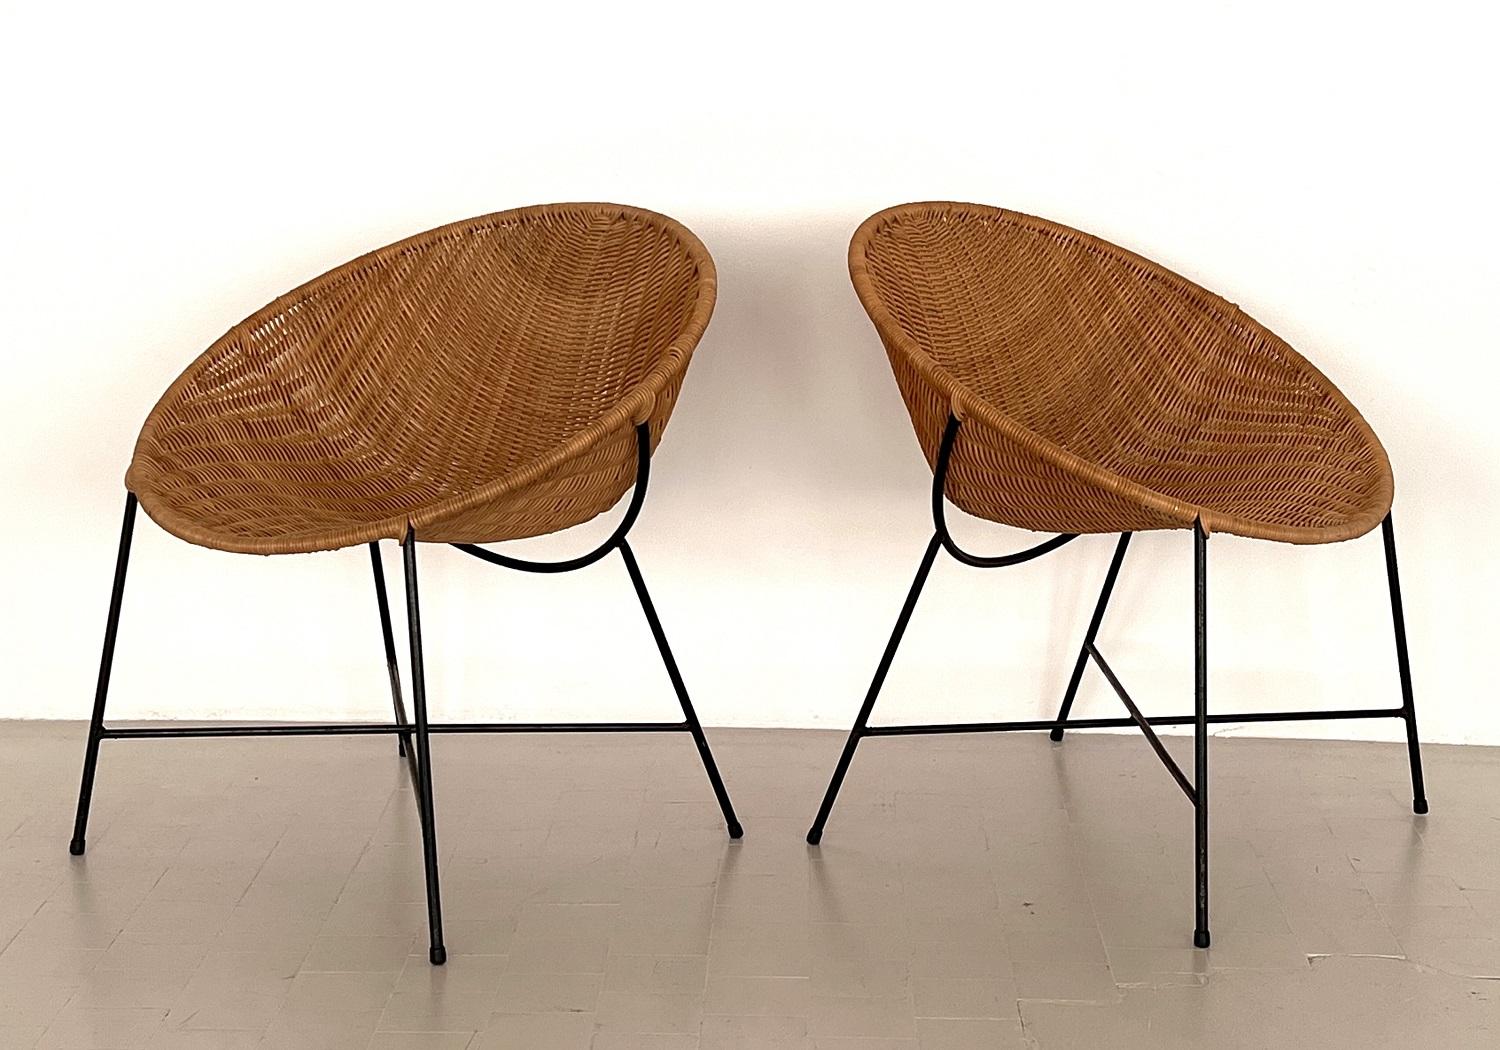 Gorgeous pair of lounge chairs made in rattan with metal base.
The rattan seats are in almost excellent vintage condition, no defects, and in wonderful dry and clean execution.
The metal bases are black painted and in very good condition too.
They